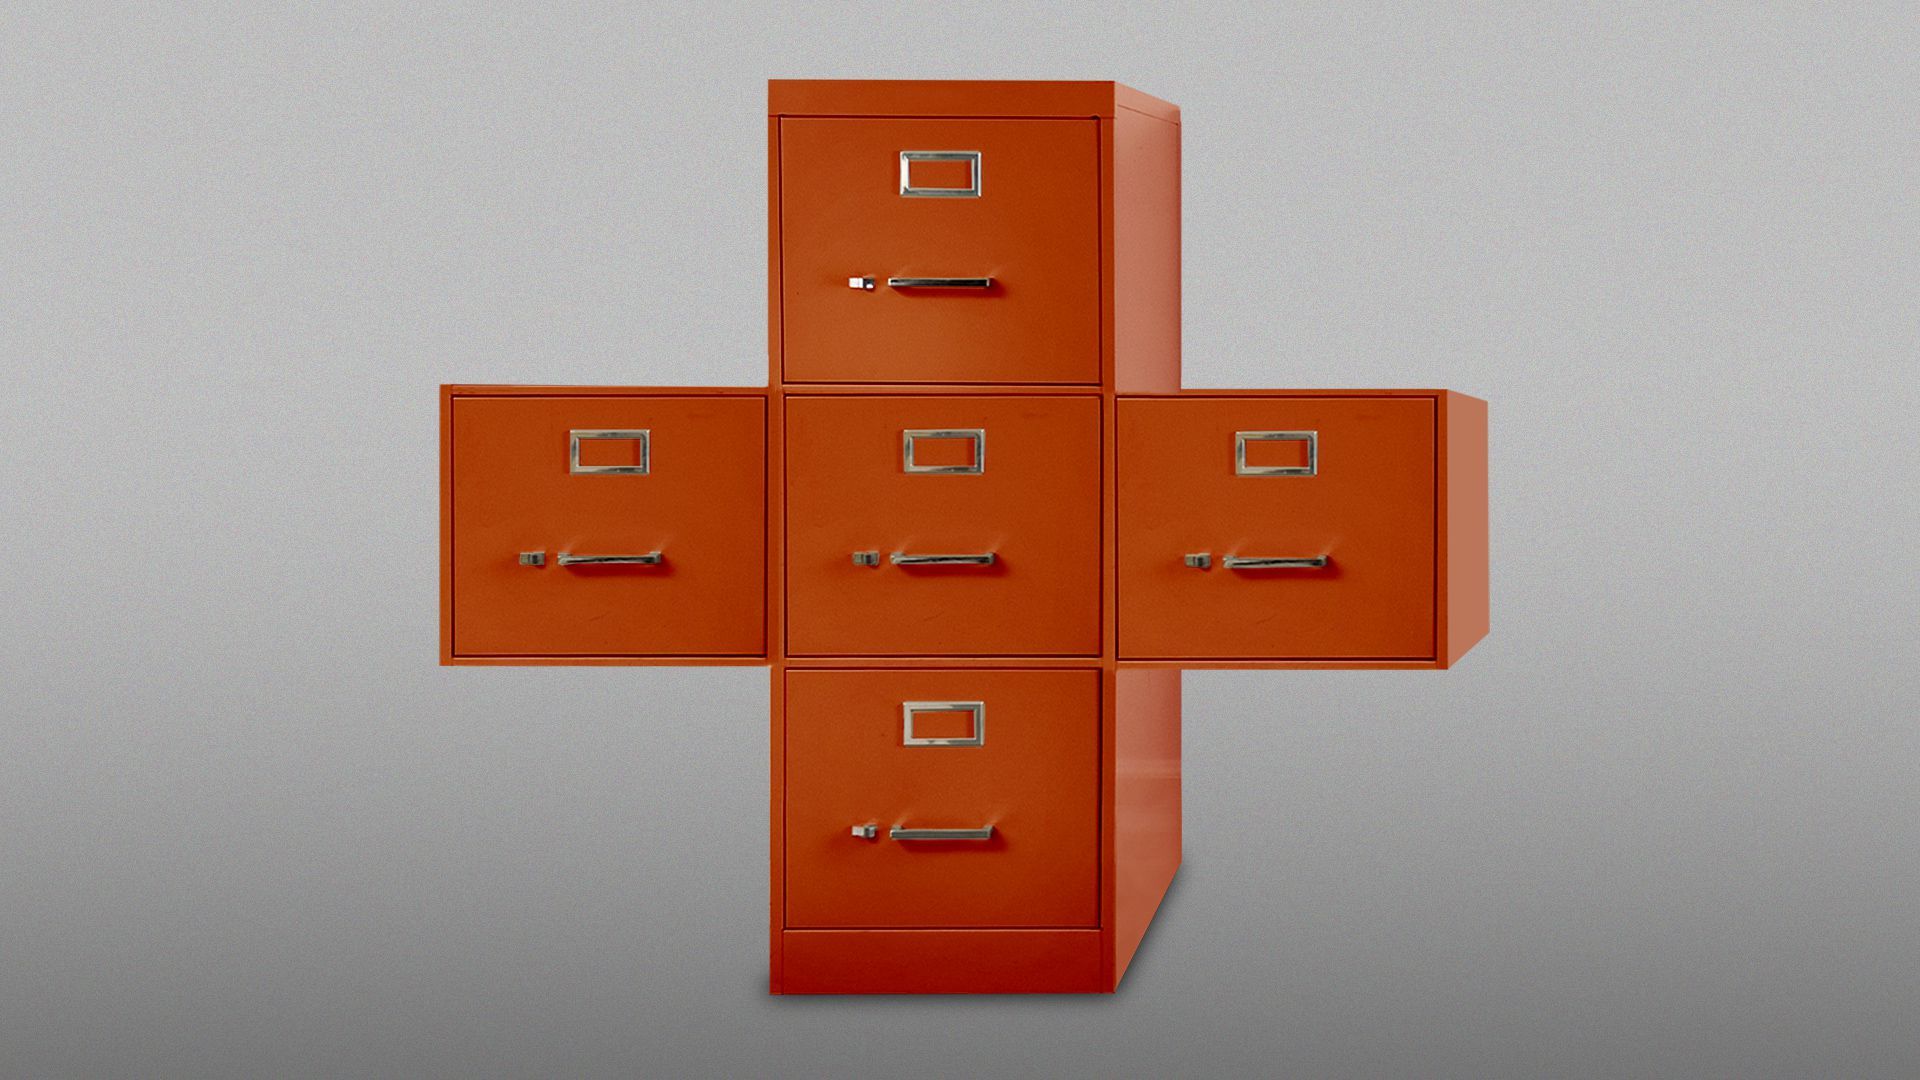 Illustration of a filing cabinet in the shape of a red cross.